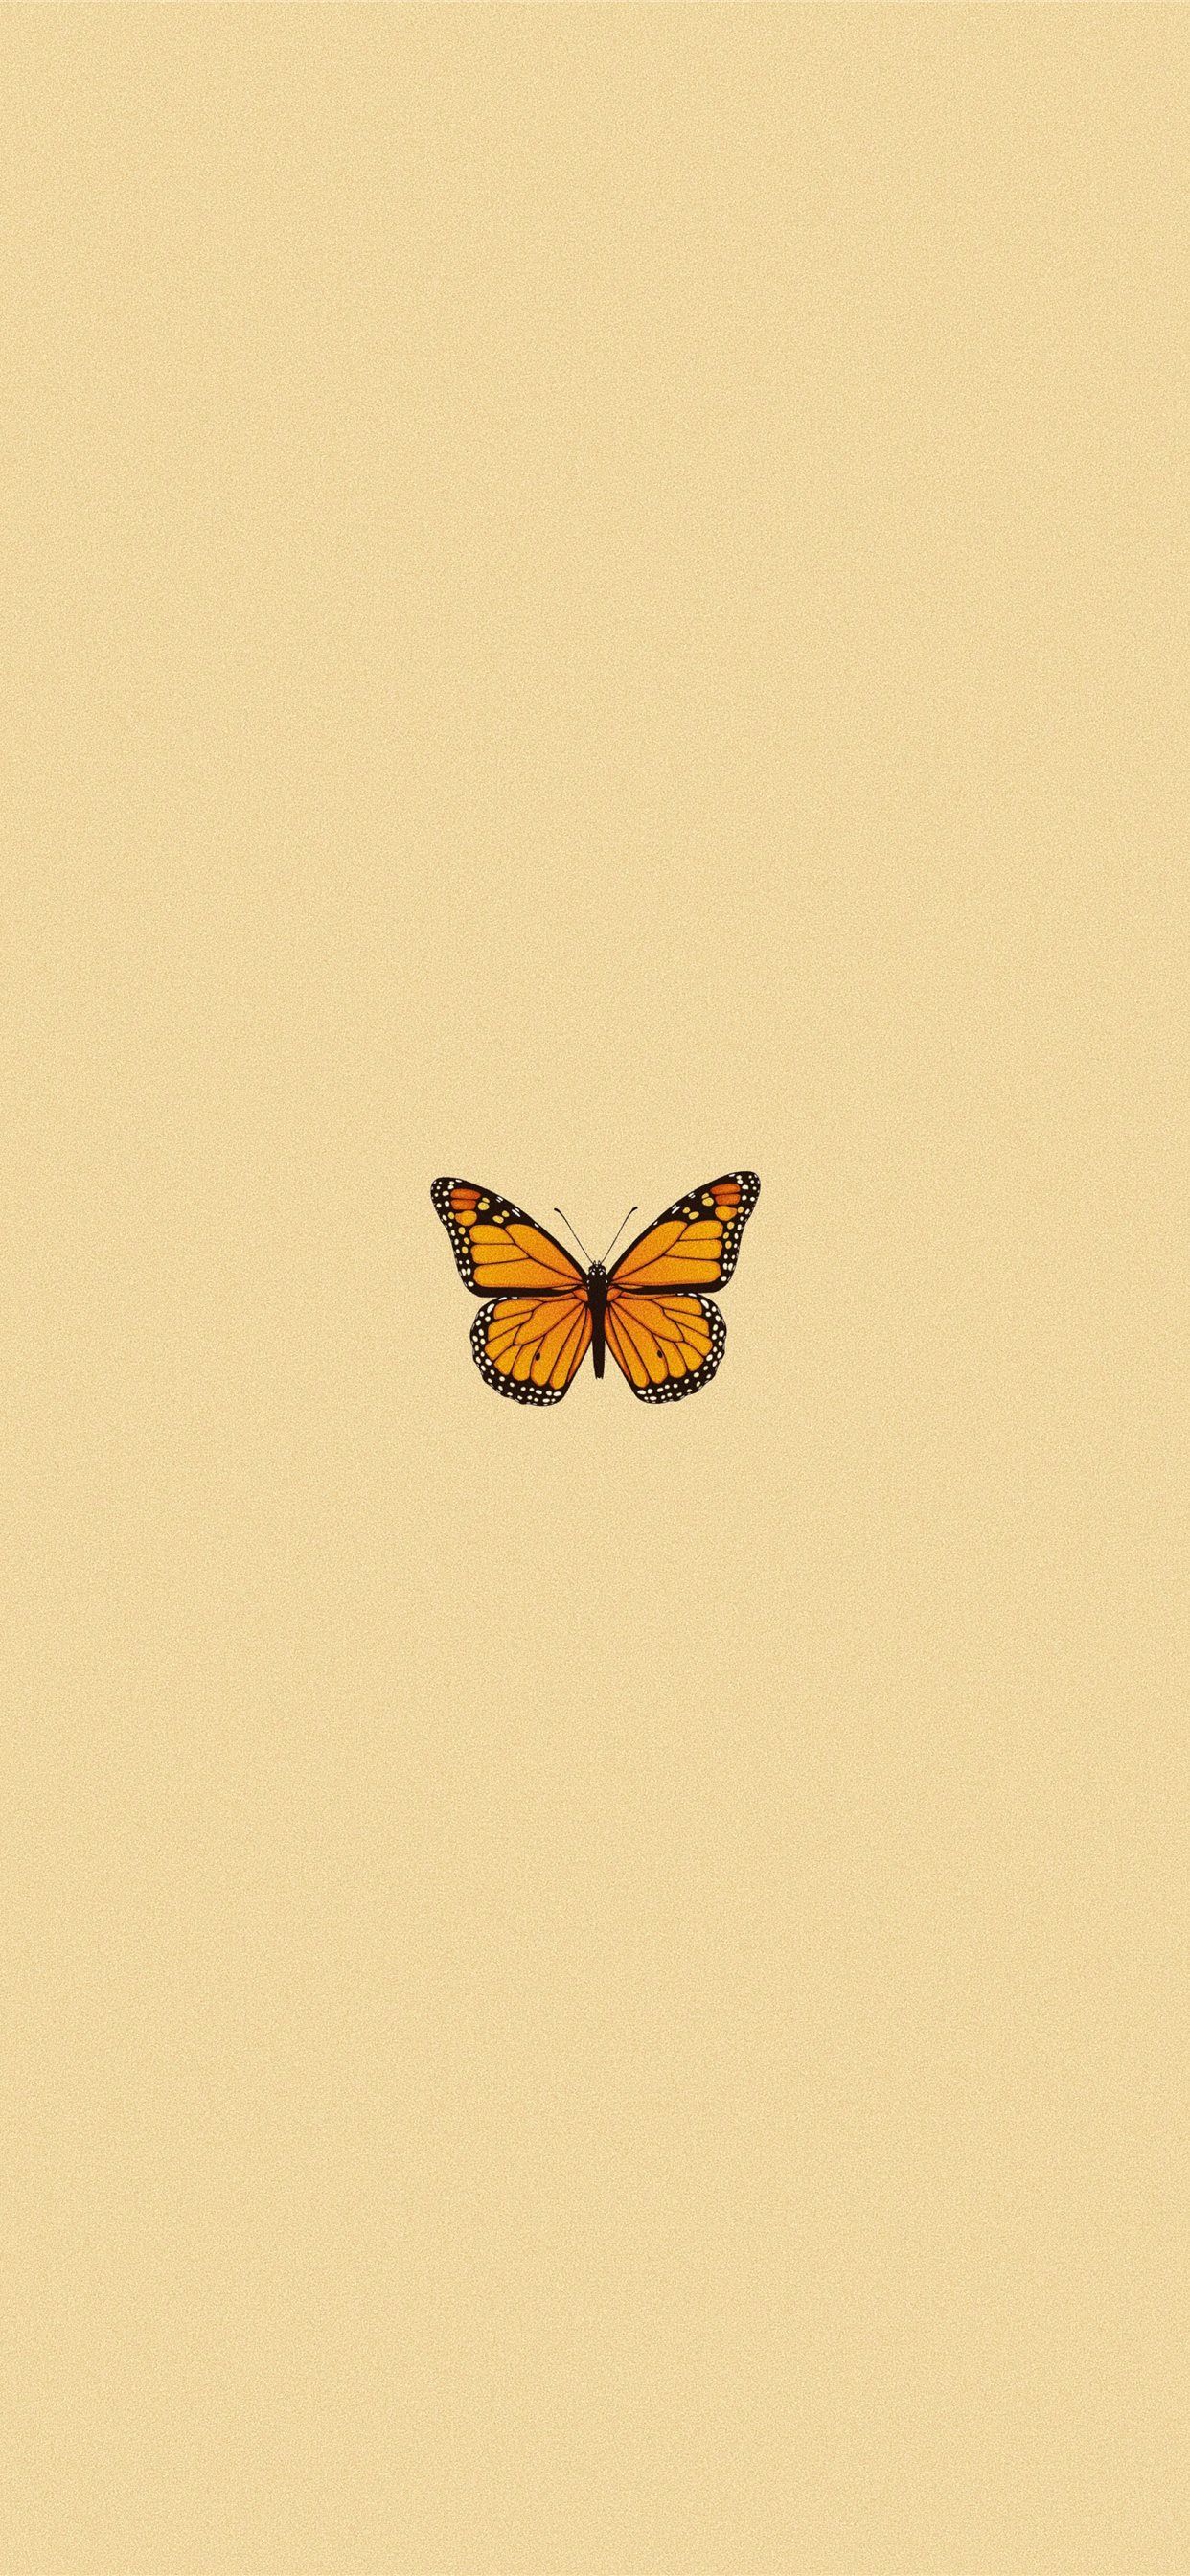 Aesthetic Butterfly iPhone Wallpapers - Wallpaper Cave